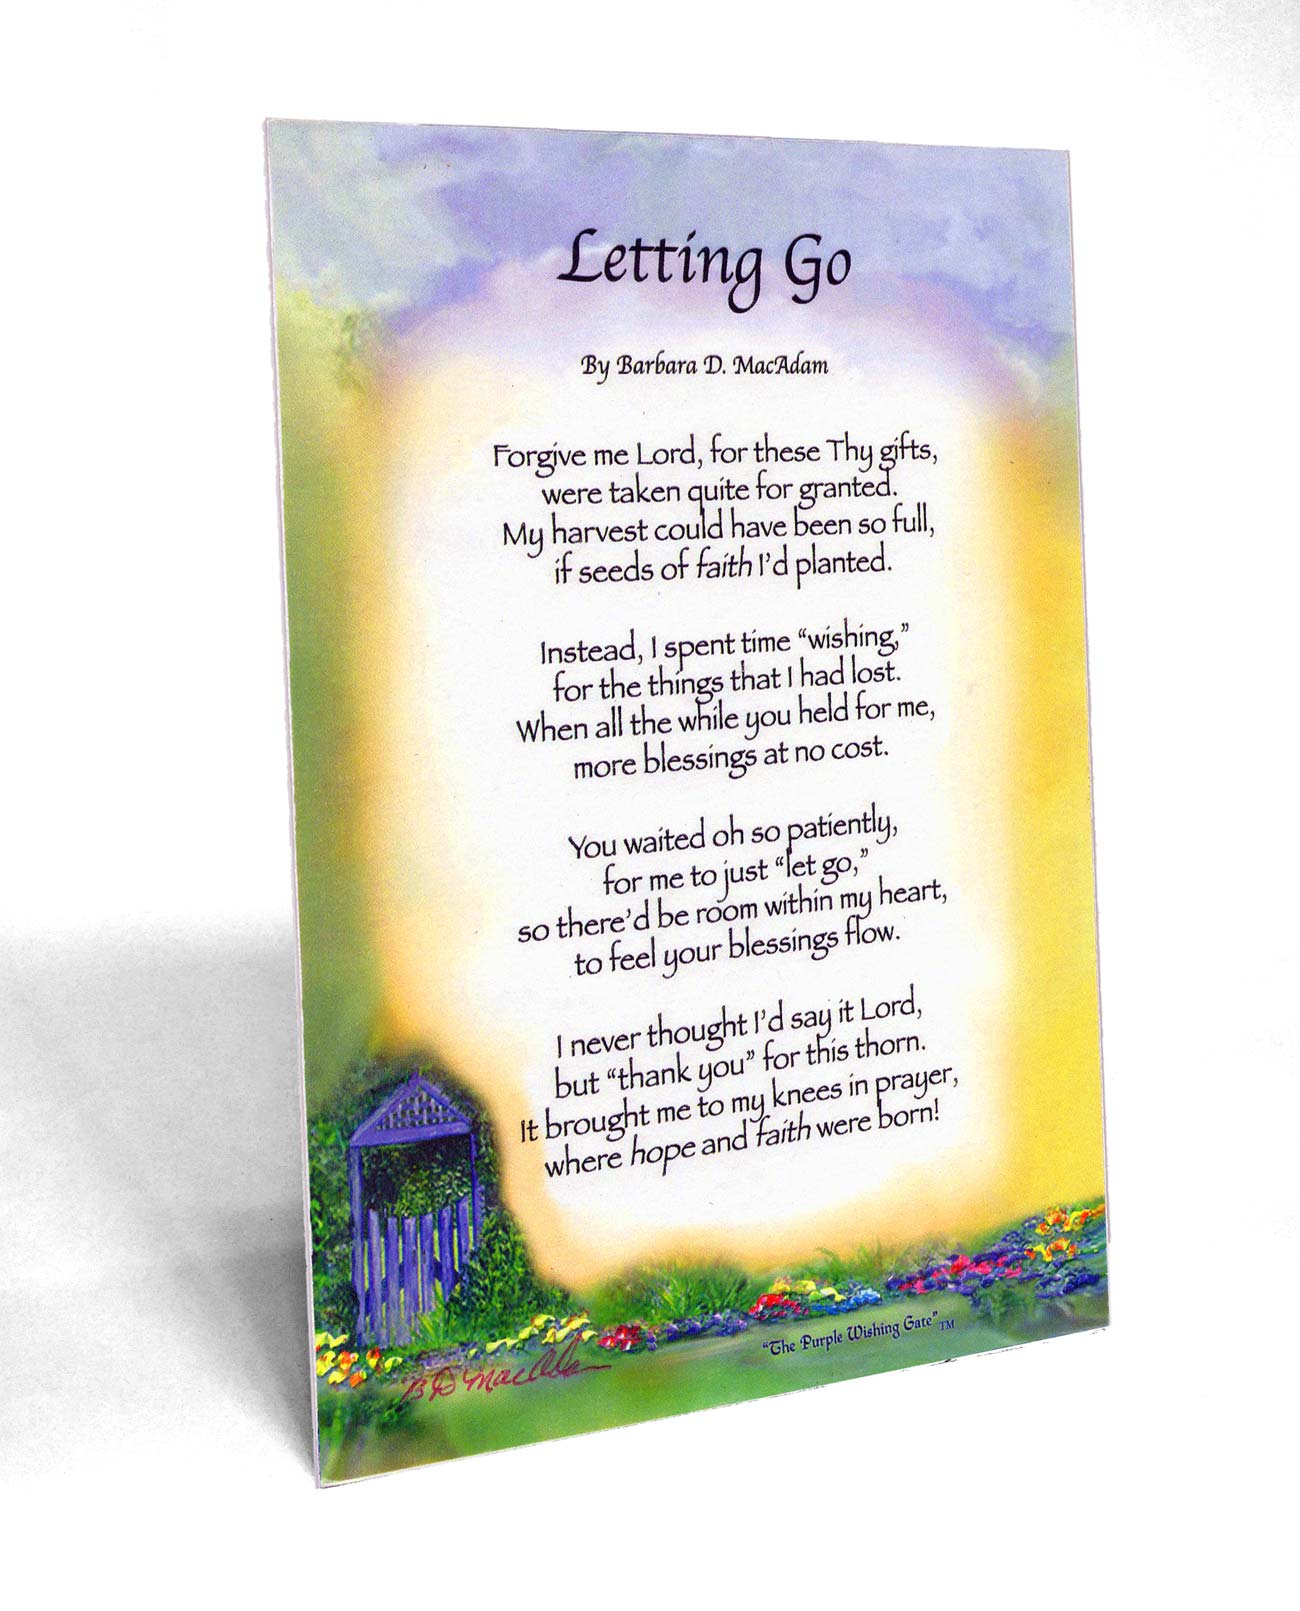 
              Letting Go - Clearance | 5x7 Frame-able Gift Clearance | PurpleWishingGate.com
                
        	